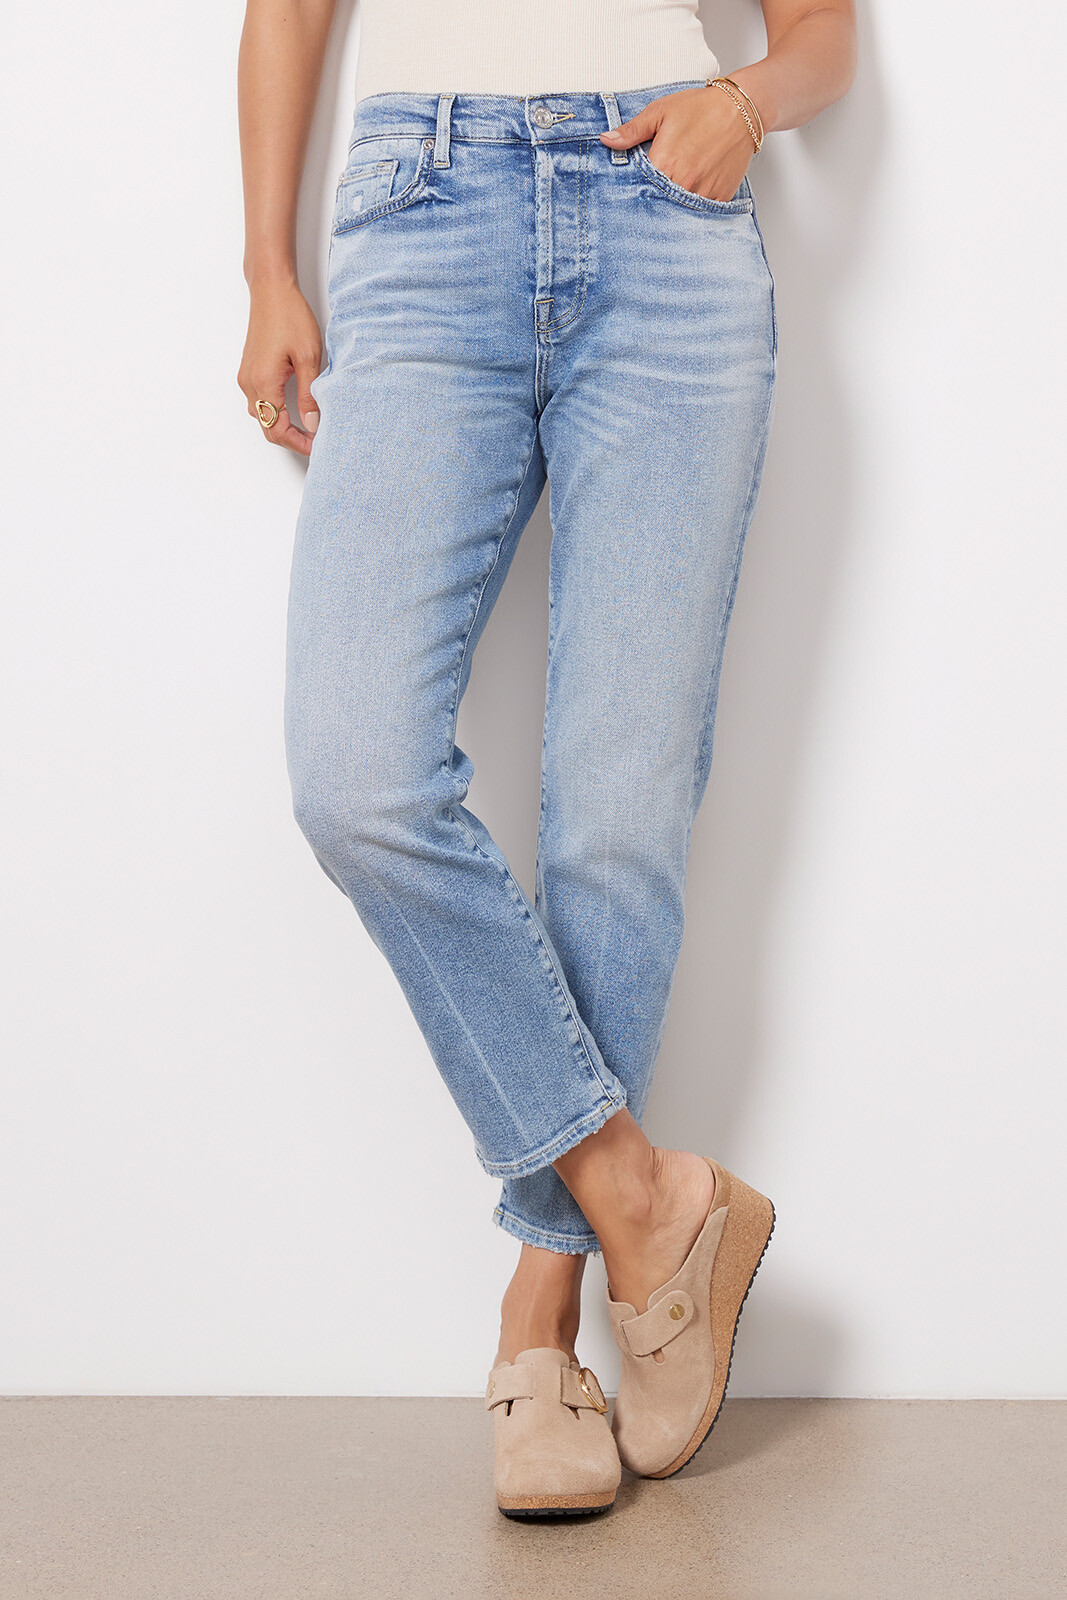 Vintage Boyfriend Style Flare High Waisted Bootcut Jeans For Women Low  Rise, Loose Fit, Comfortable, Elastic 2023 Collection Z230728 From  Misihan01, $4.55